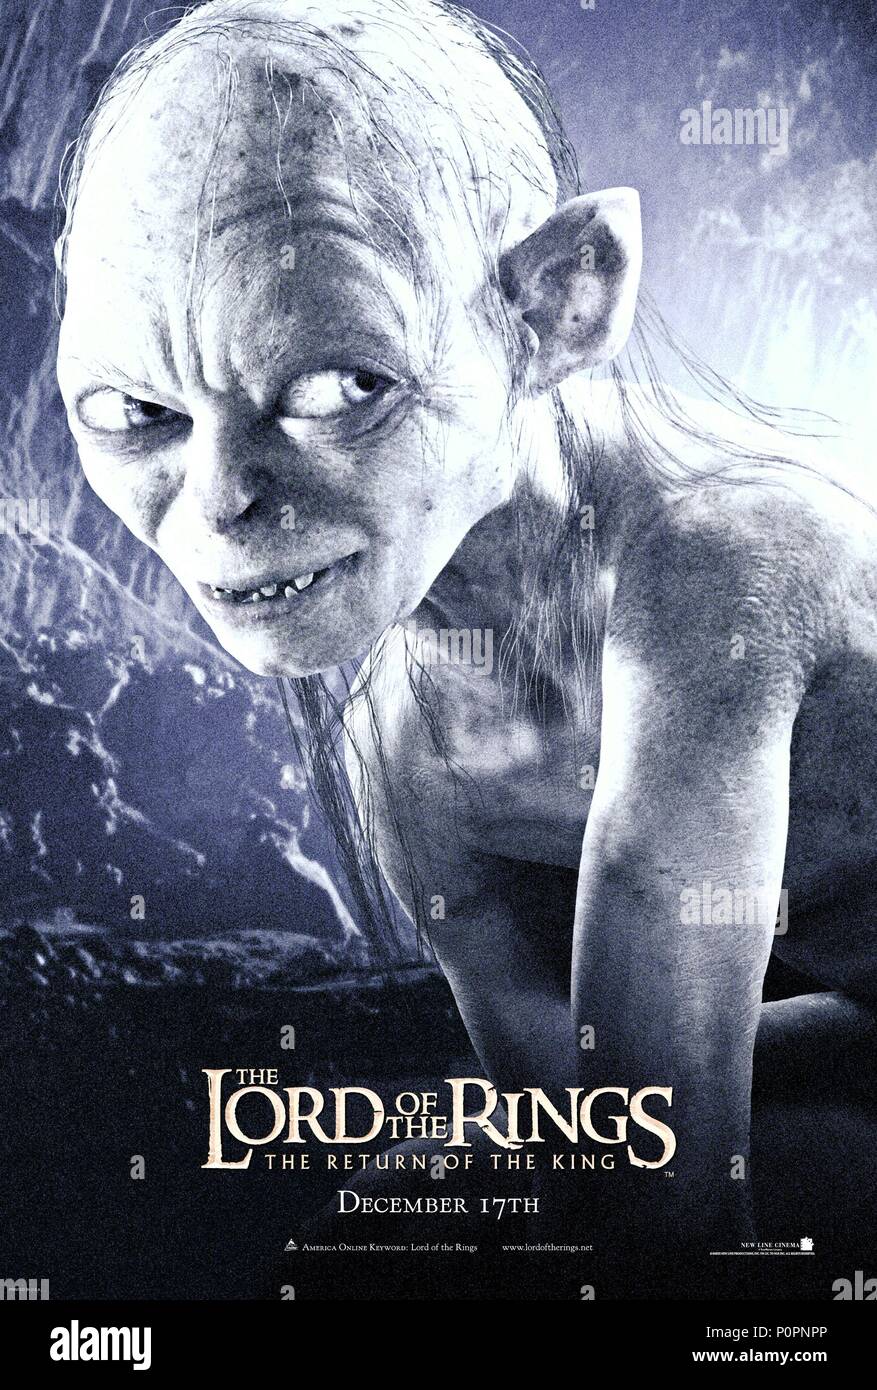 The Lord of the Rings: The Return of the King (2003) - Turner Classic Movies